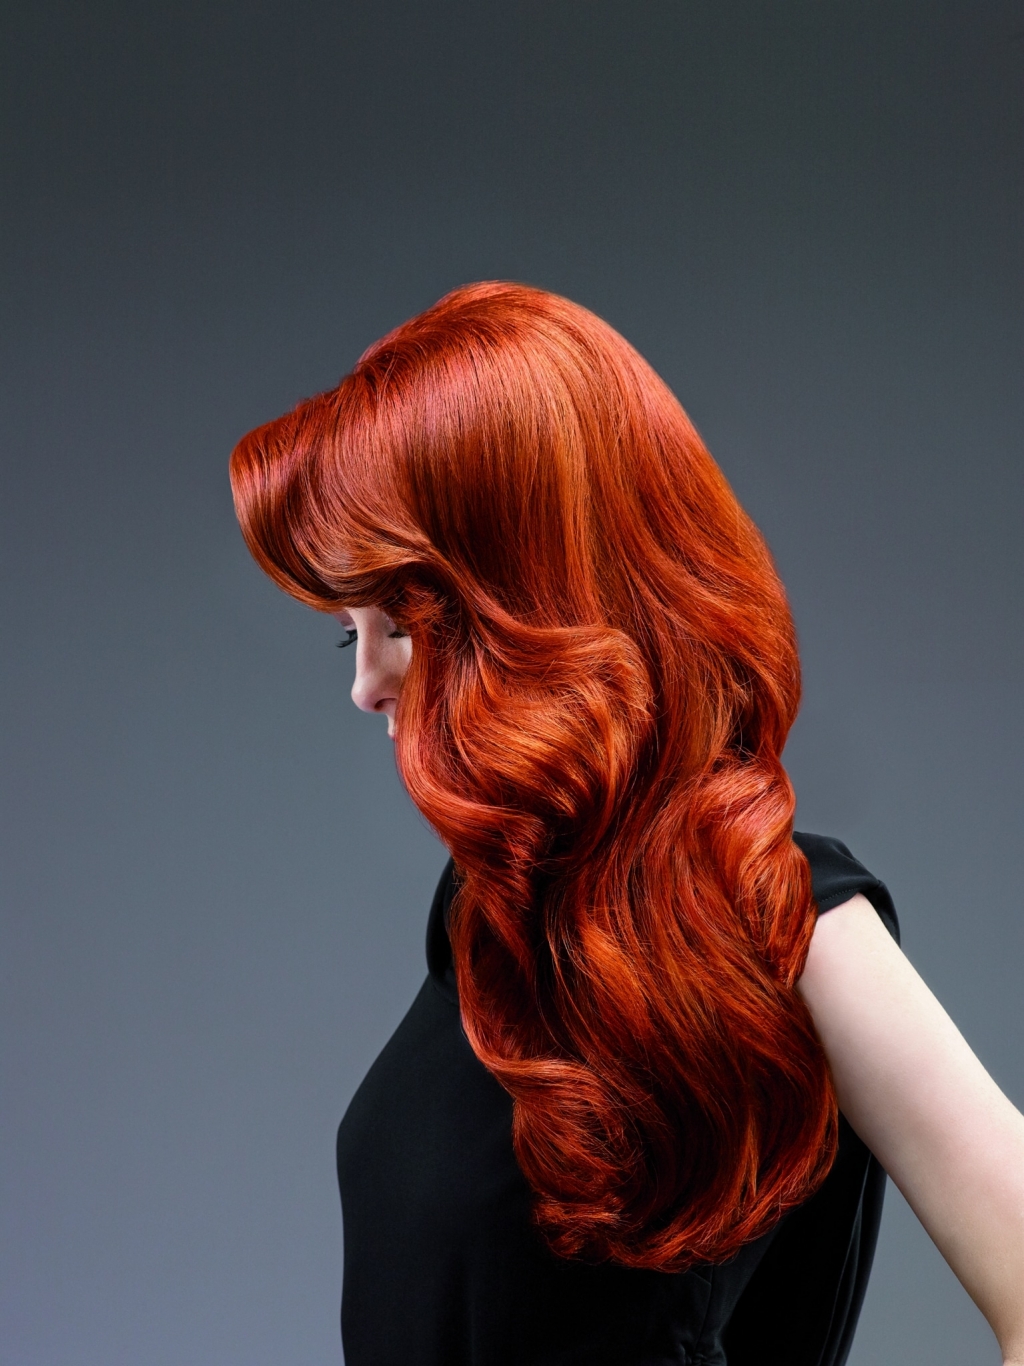 Woman with red hair with hair thickening in lengths and tips